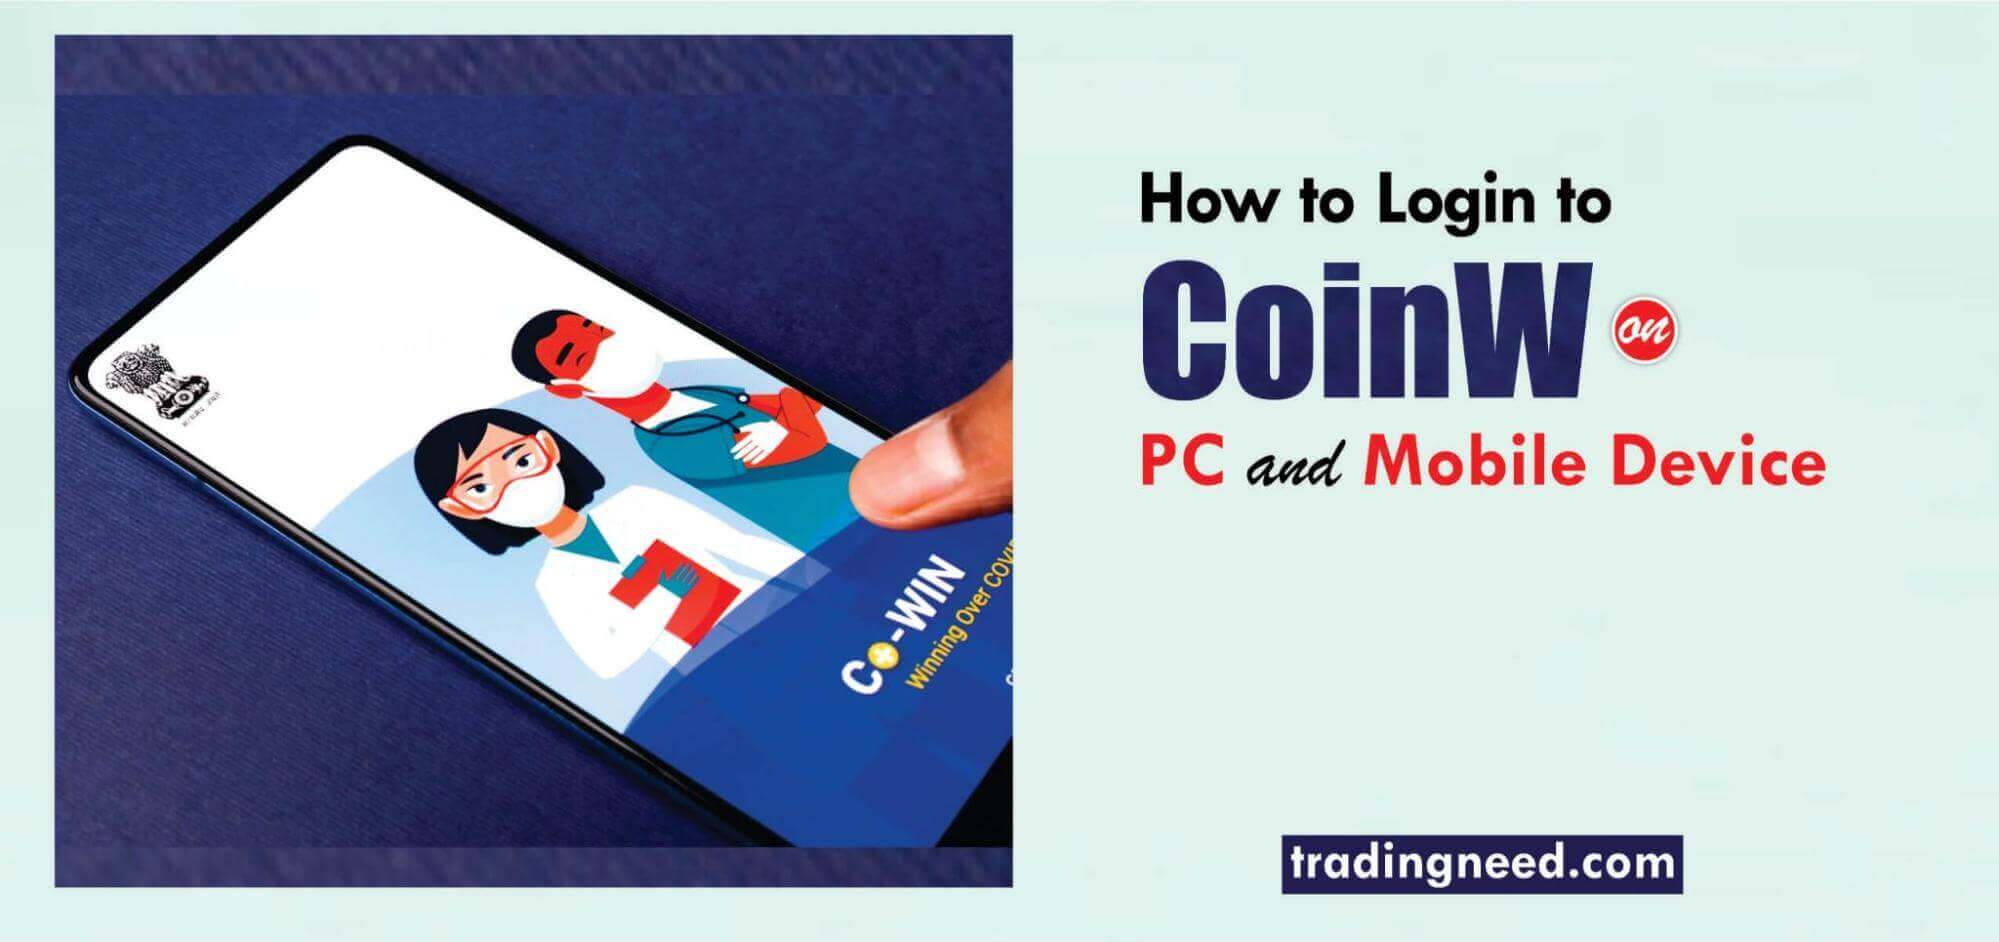 How to login to CoinW